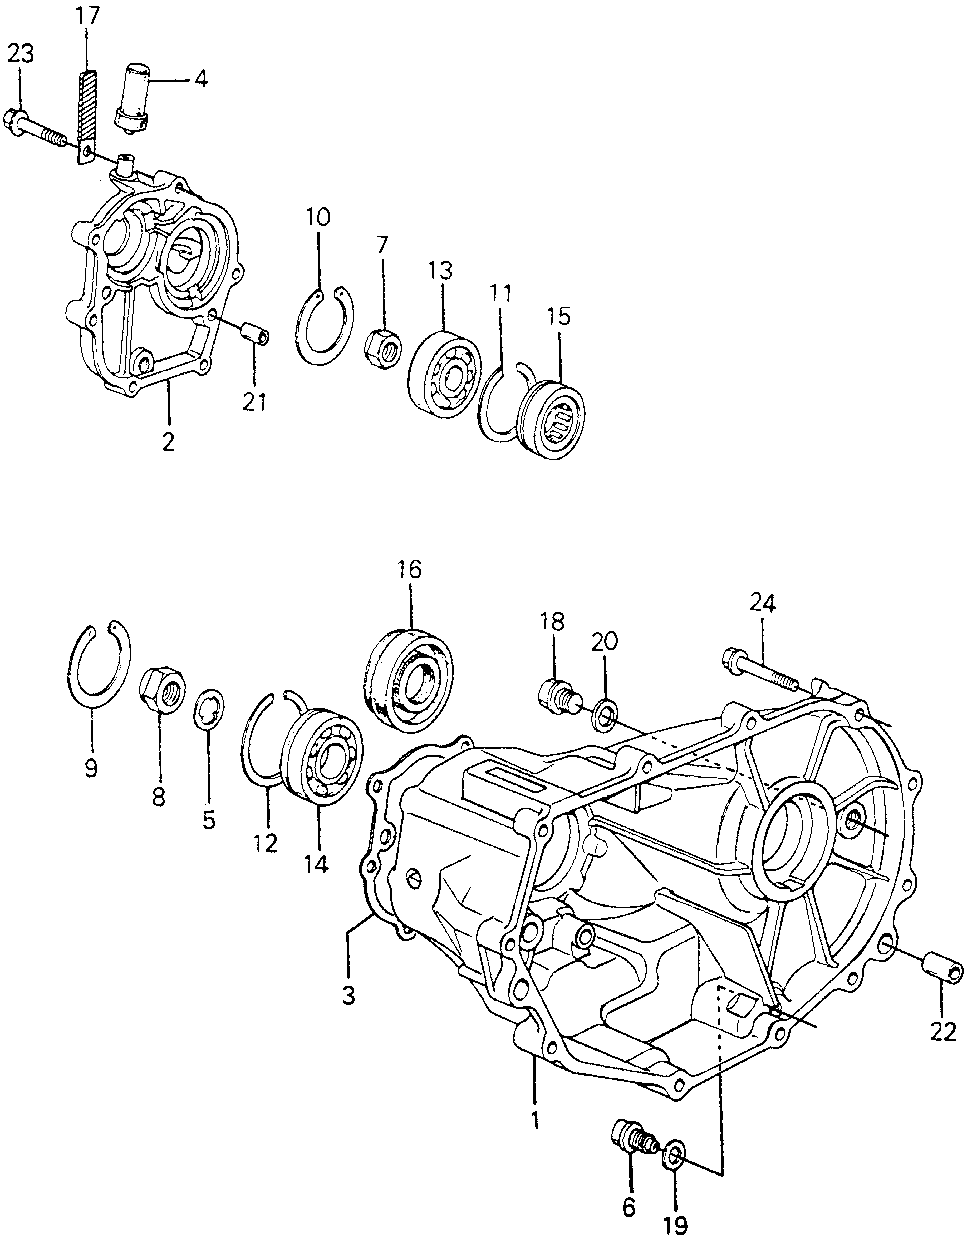 21310-PA0-000 - COVER, TRANSMISSION